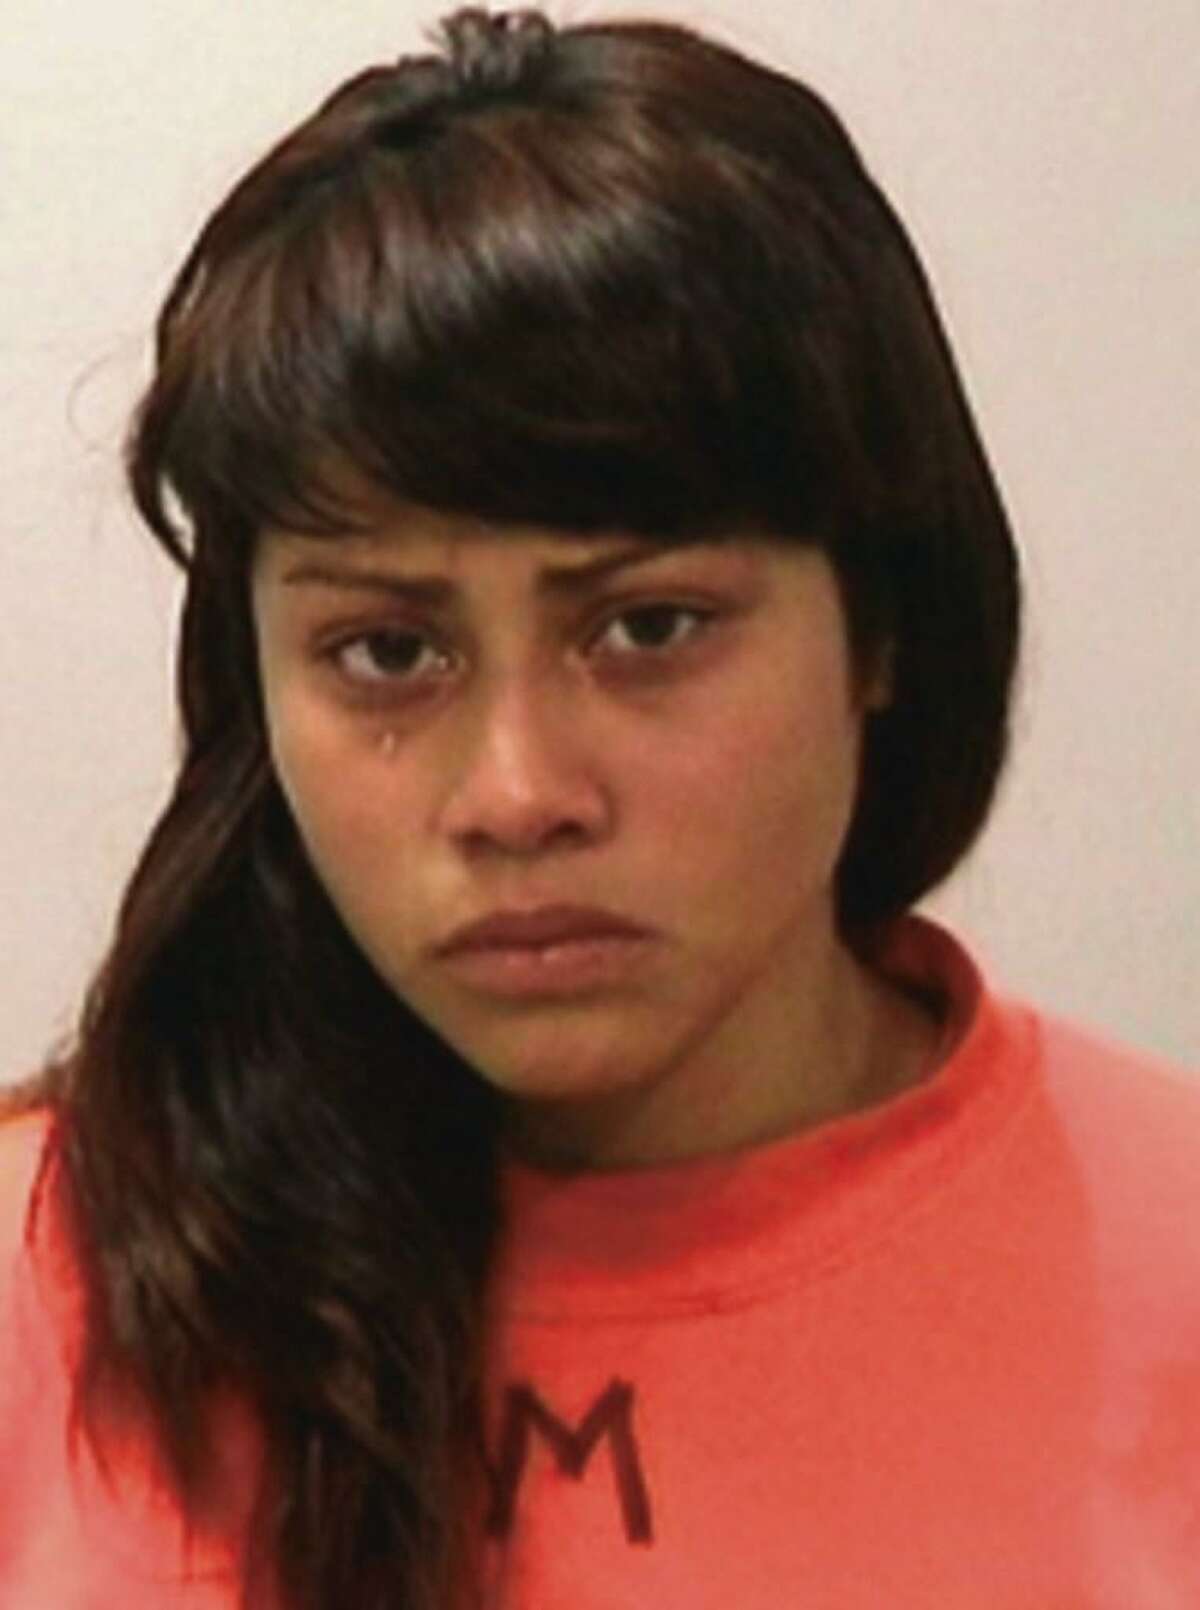 Lizette Cauich, 25, was found guilty of second-degree murder, assault with a deadly weapon and other charges in the stabbing death of Mitzi Campbell in San Francisco and an earlier attack on a parking attendant in the Tenderloin.